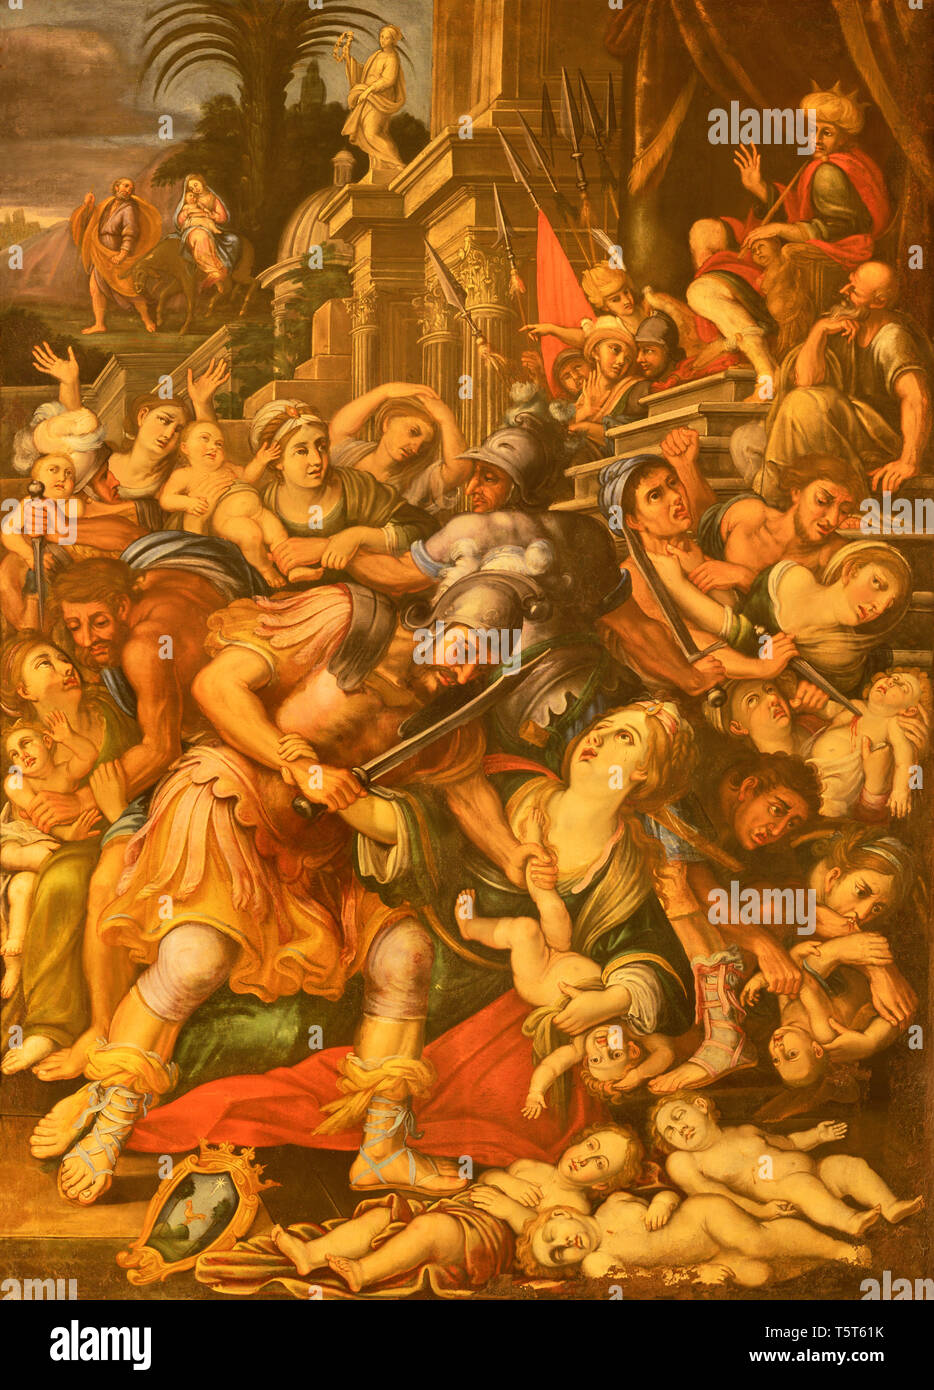 ACIREALE, ITALY - APRIL 11, 2018: The painting of The Masacre of Innocents in Duomo - cattedrale di Maria Santissima Annunziata by Matteo Ragonisi. Stock Photo